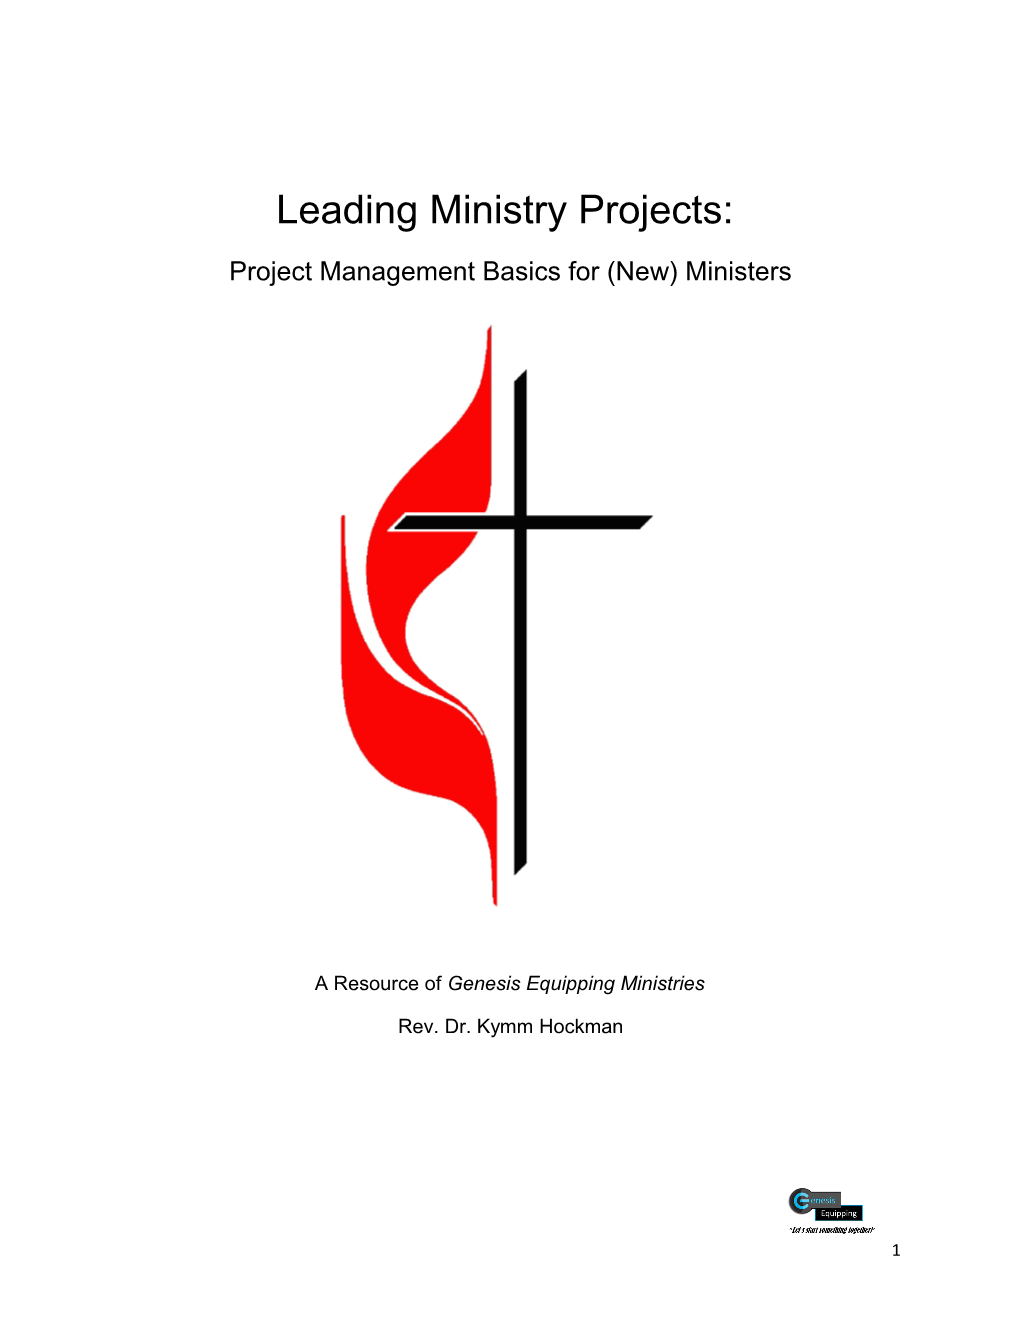 Project Management Basics for (New) Ministers